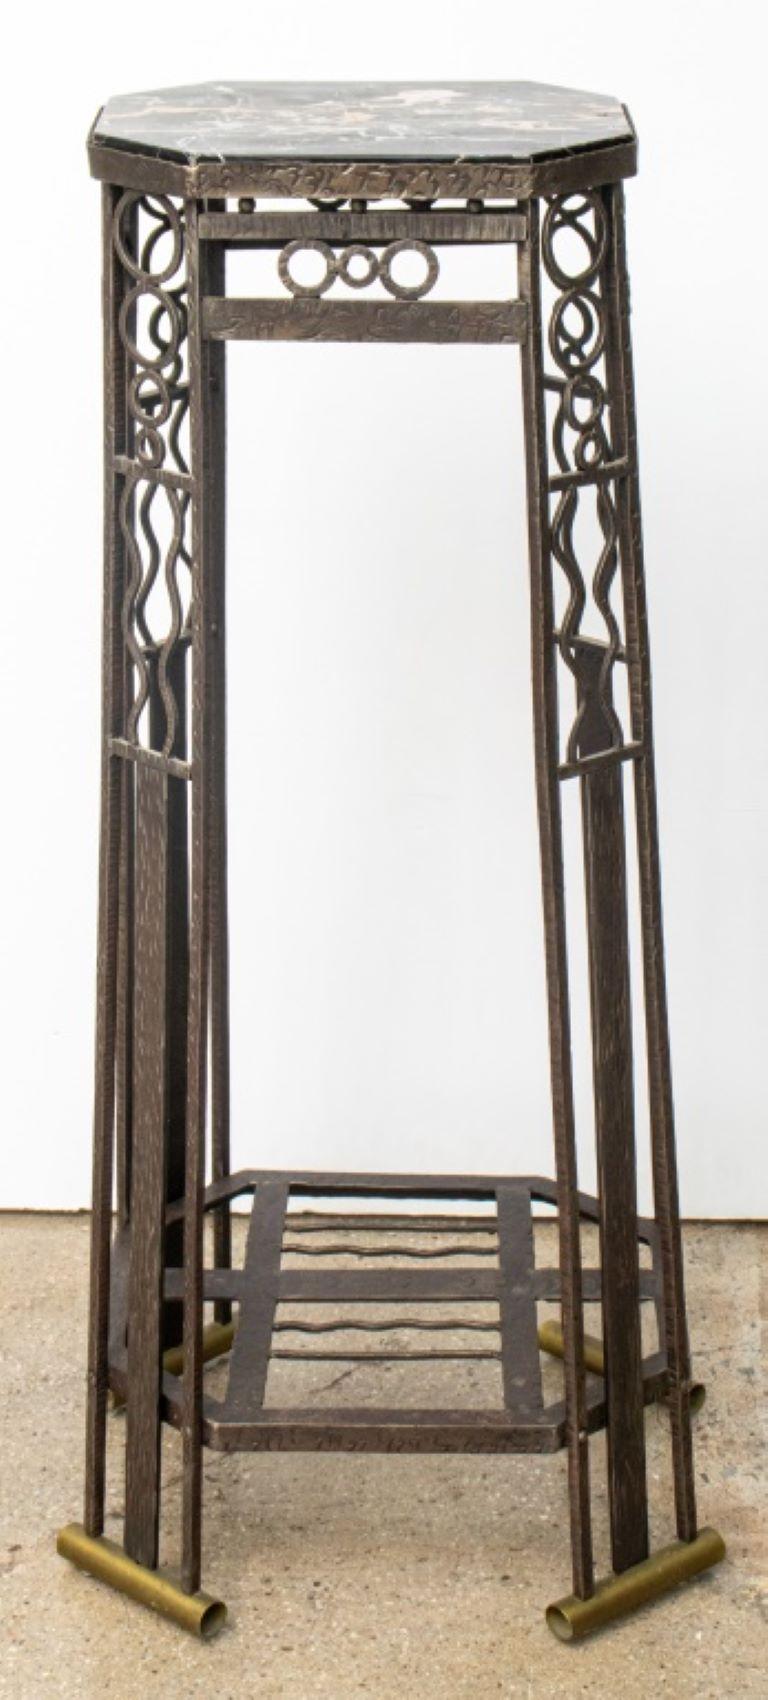 Edgar Brandt Style Art Deco Wrought Iron Pedestal In Good Condition For Sale In New York, NY